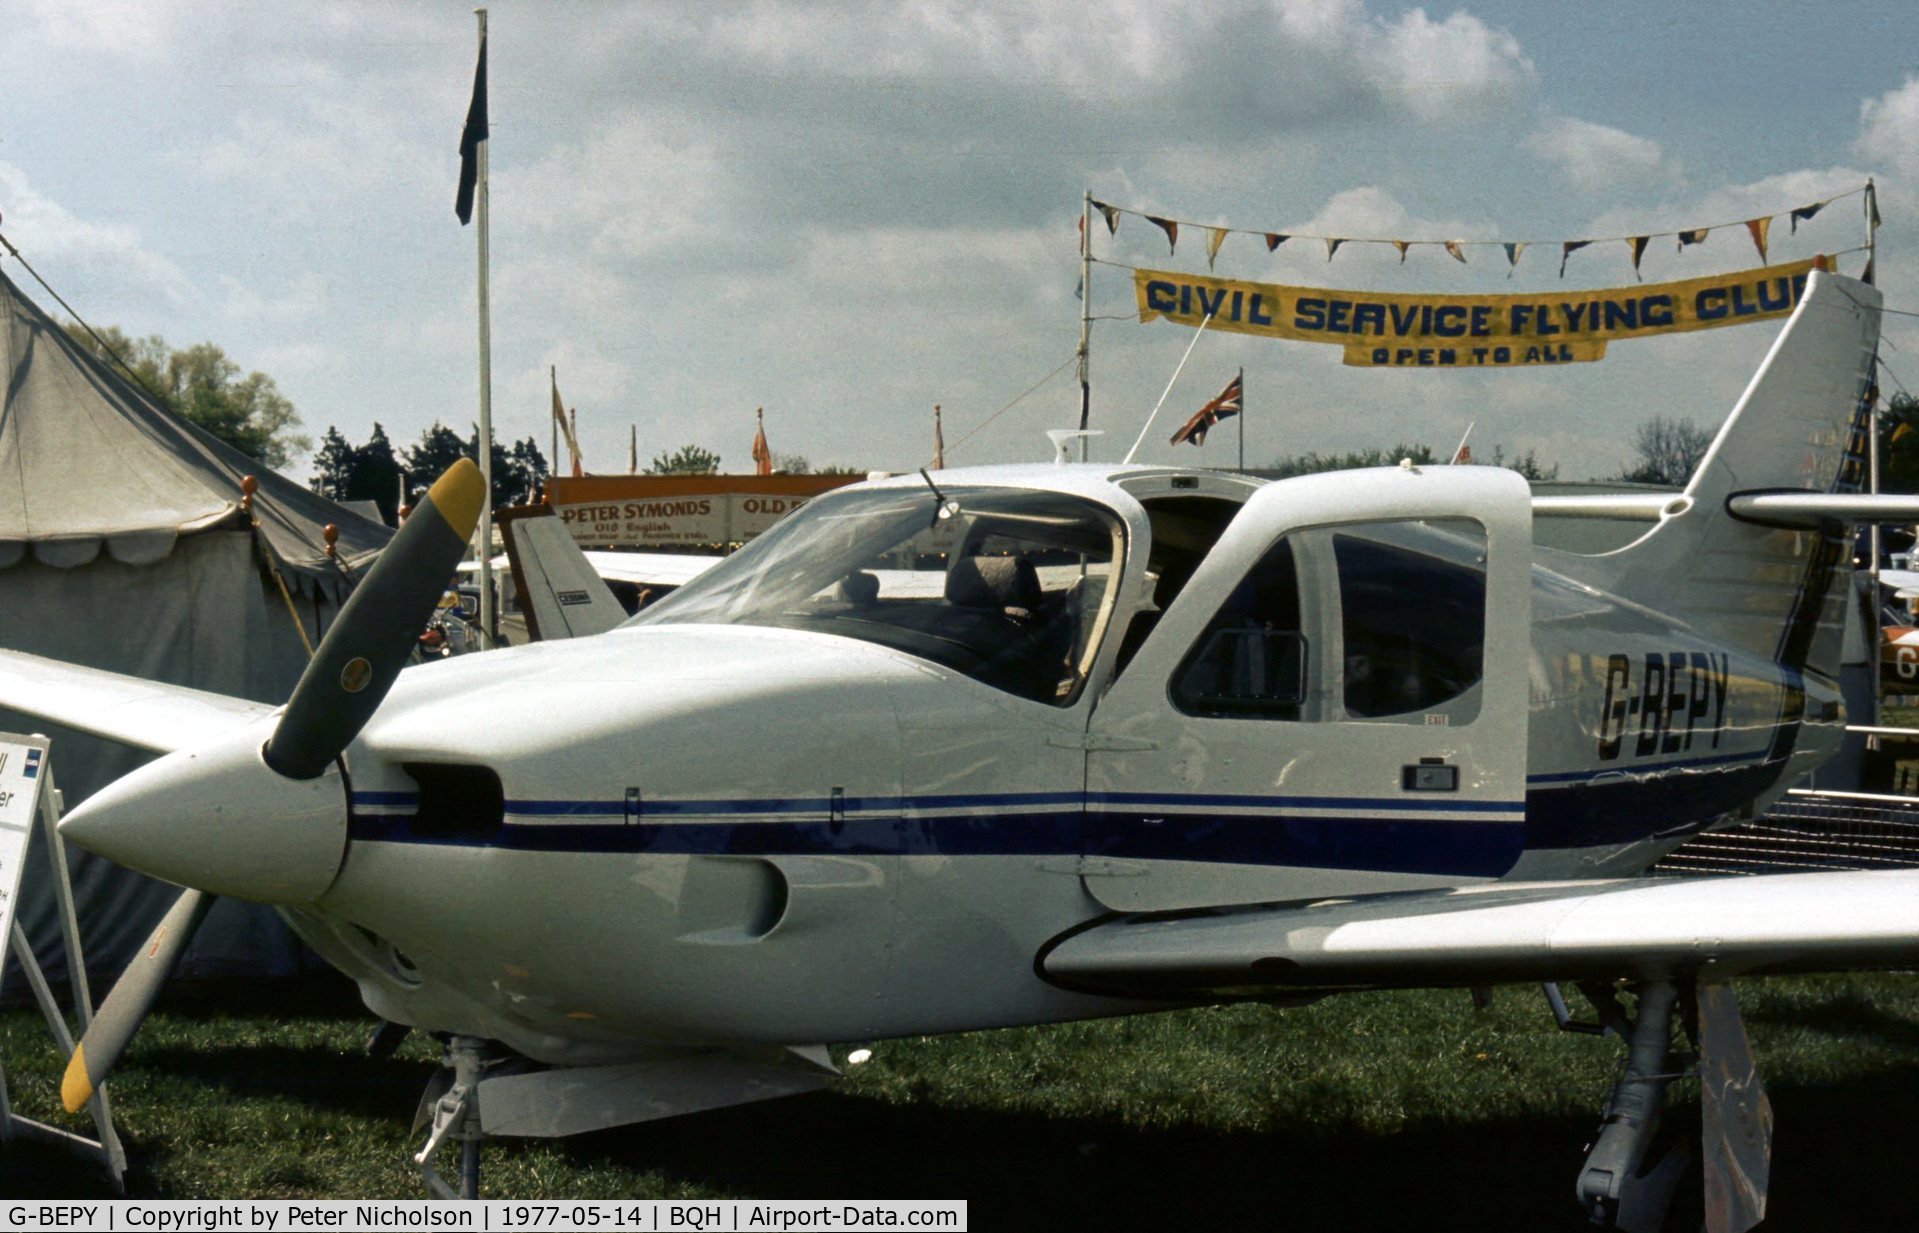 G-BEPY, 1977 Rockwell Commander 112B C/N 524, This Commander was on display at the 1977 Biggin Hill Air Fair.